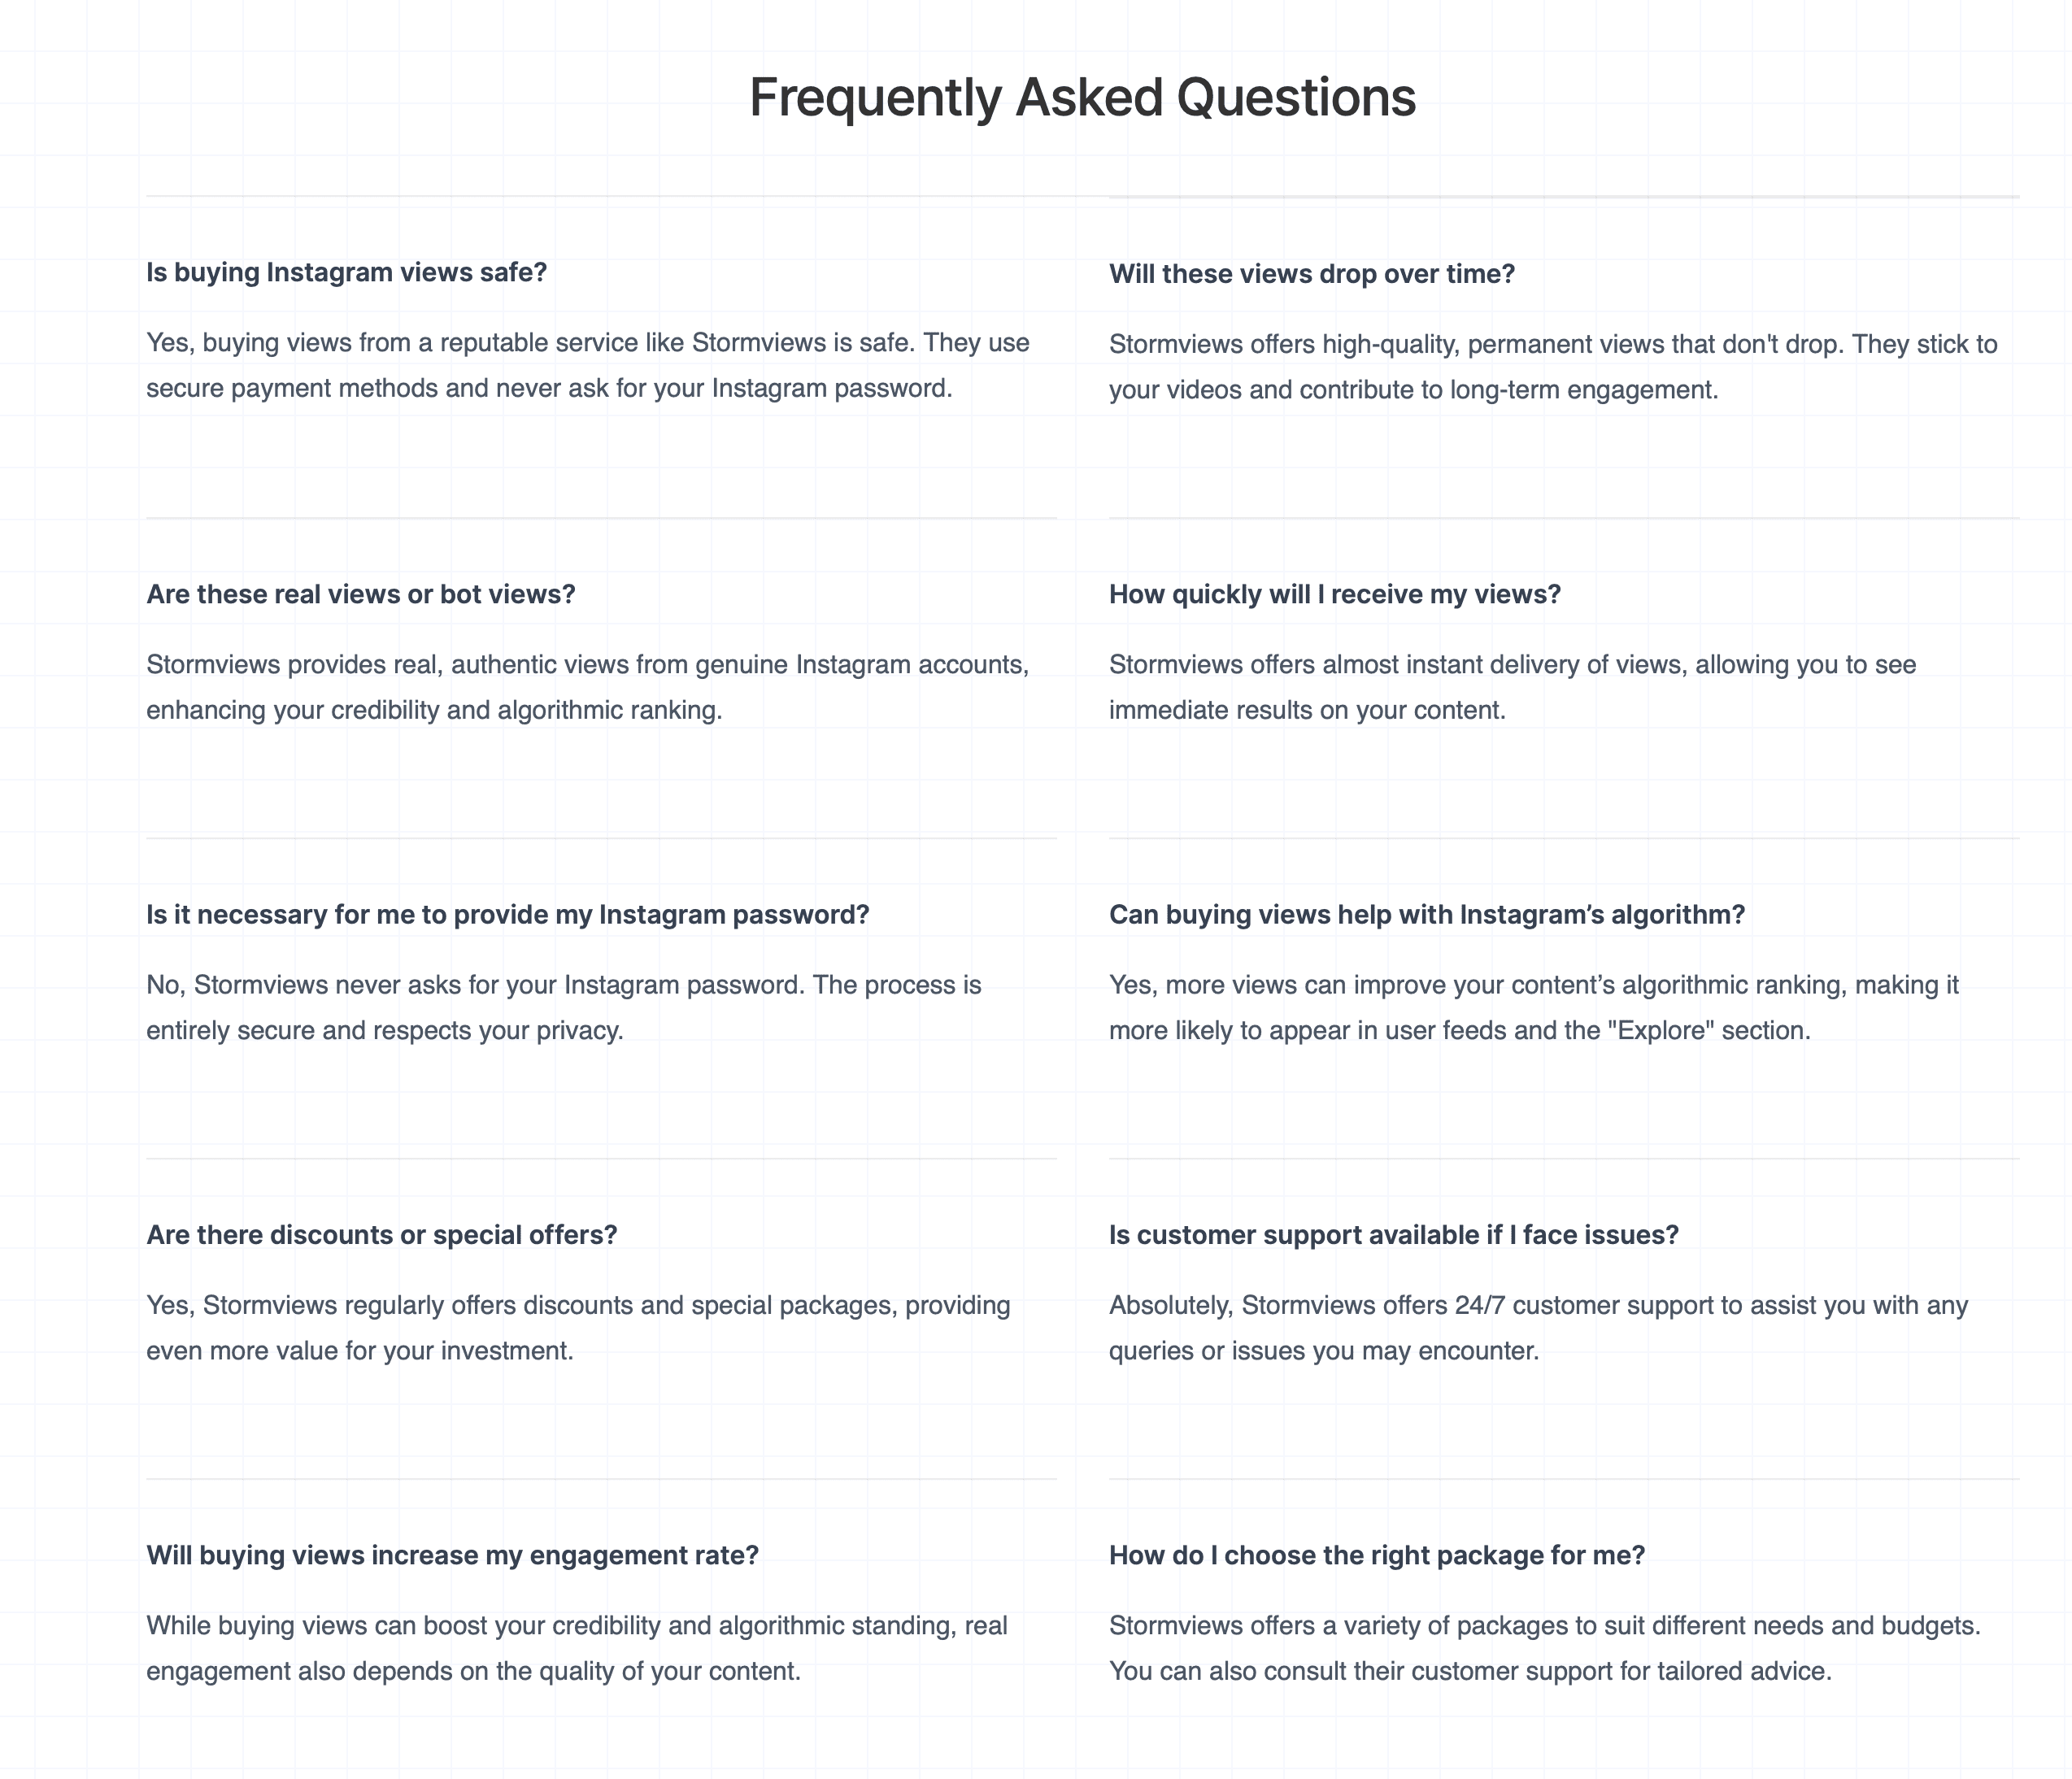 Frequently Asked Questions storm views